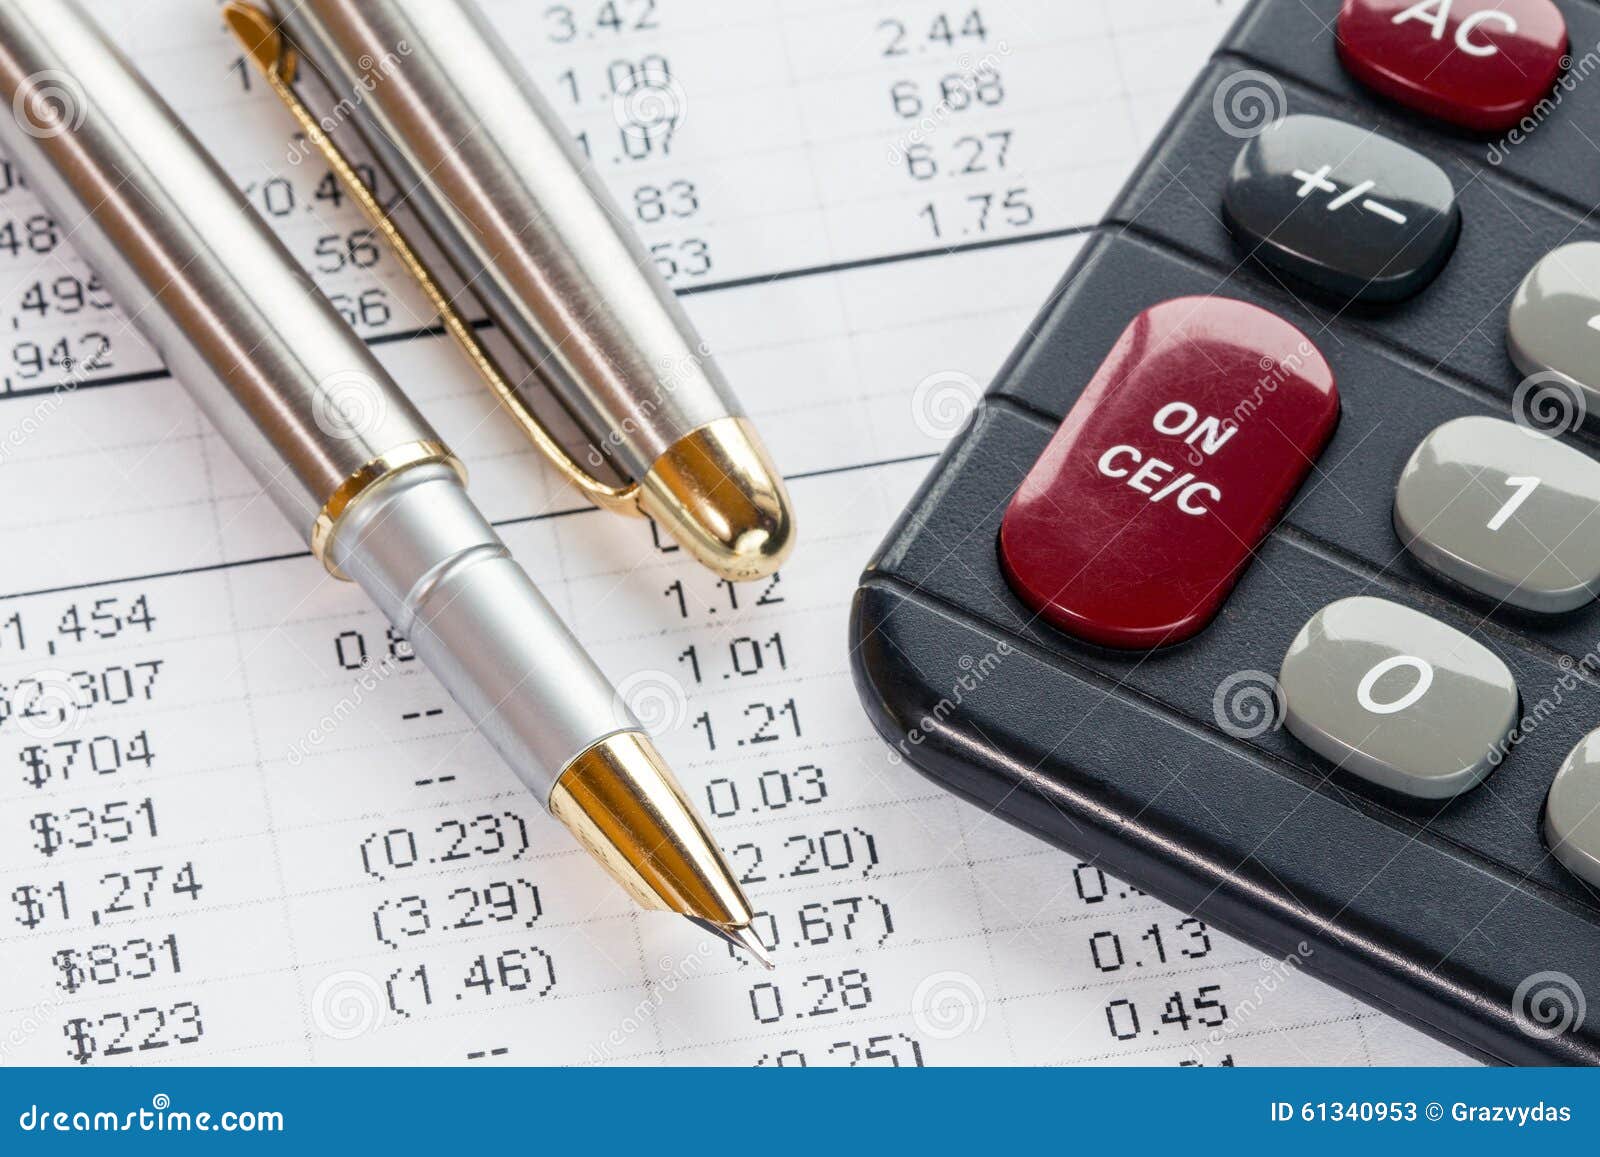 Accounting In Process With Calculator And Pen Stock Image Image Of